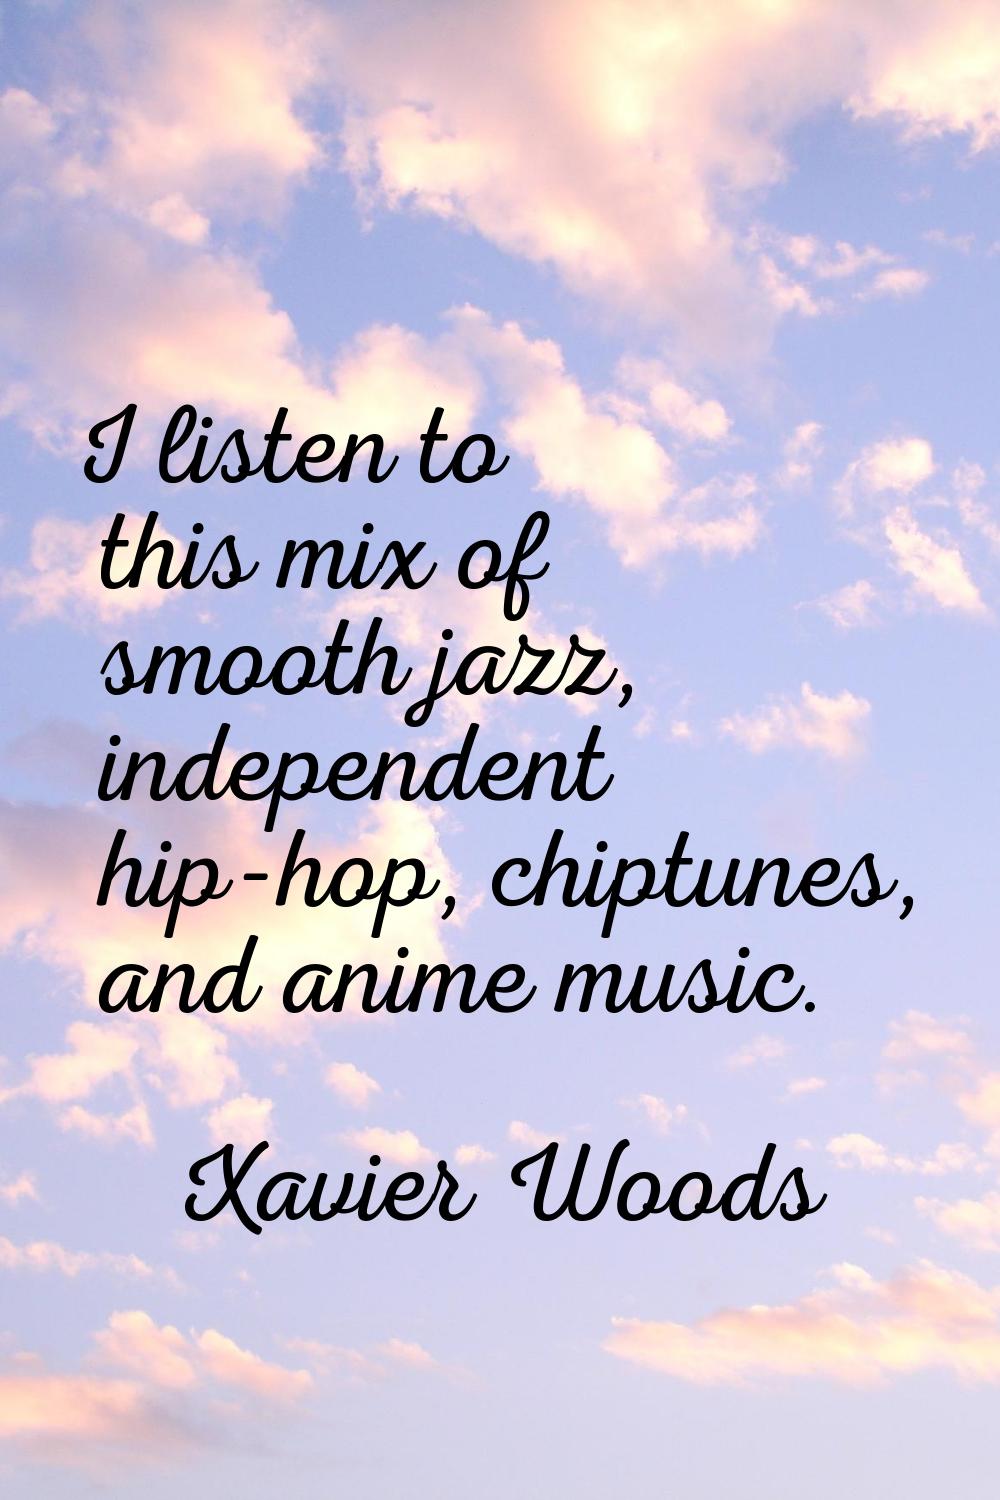 I listen to this mix of smooth jazz, independent hip-hop, chiptunes, and anime music.